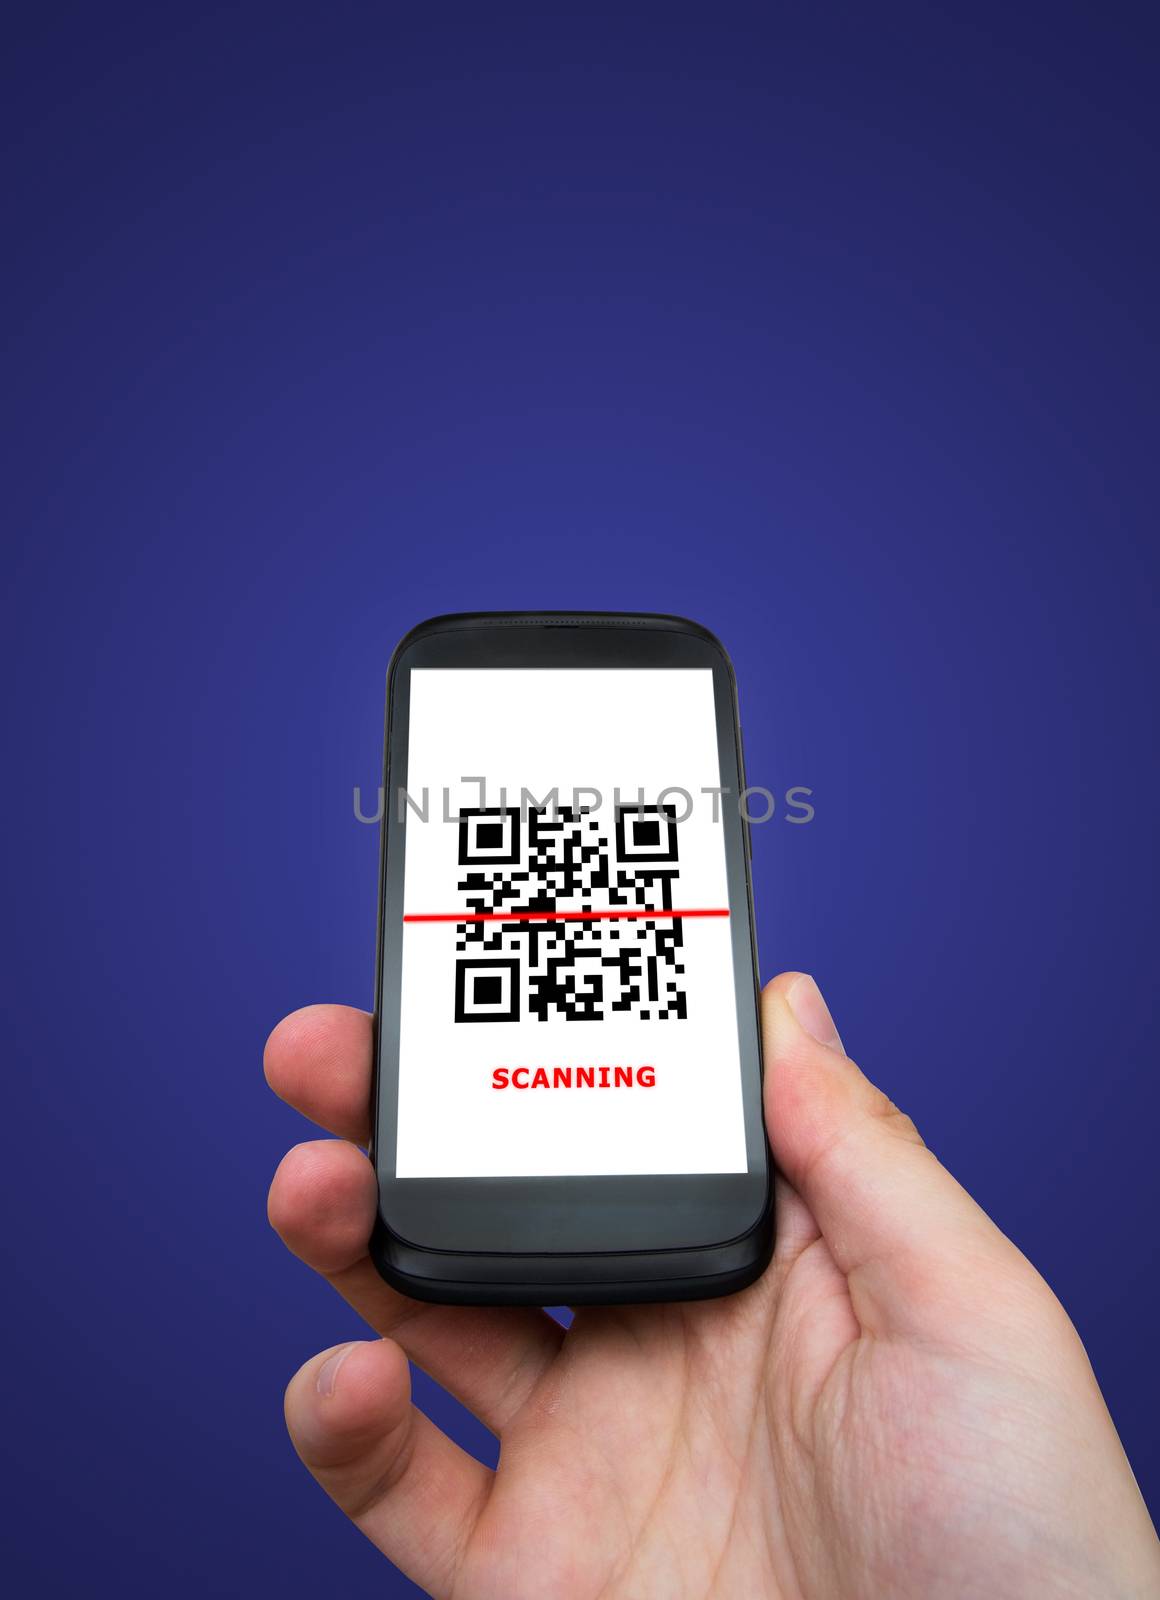 Smartphone scanning QR code by simpson33